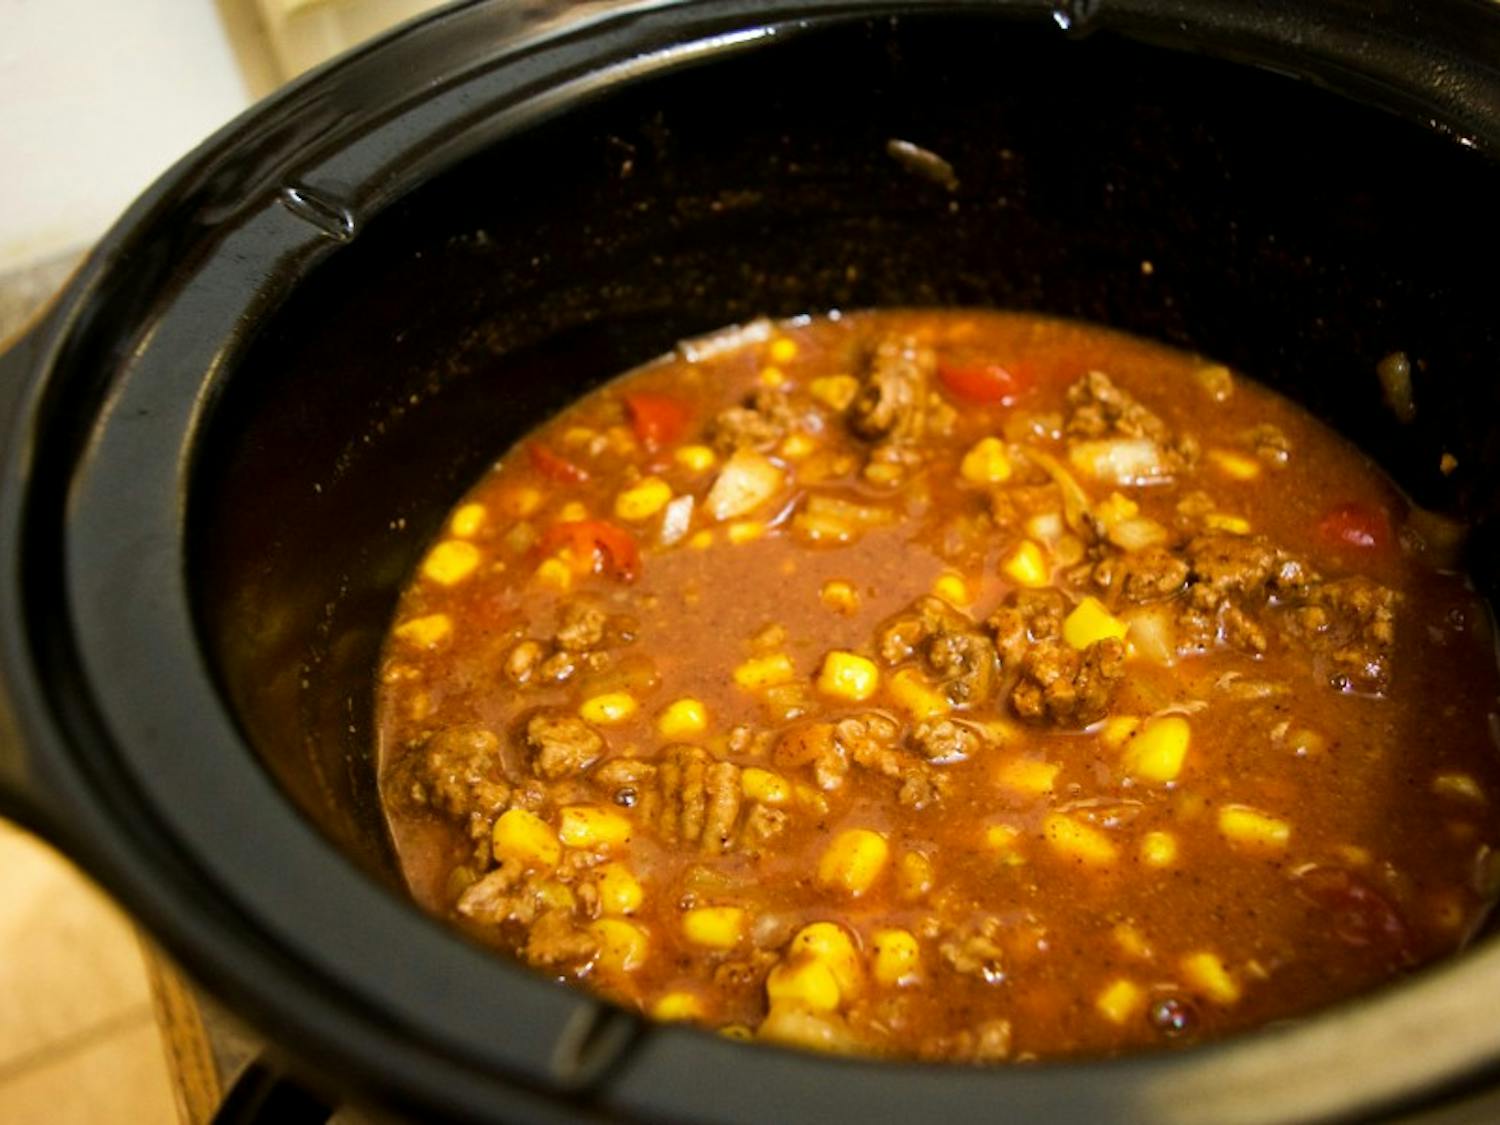 After writing this article the author decided to slow cook some chili.&nbsp;